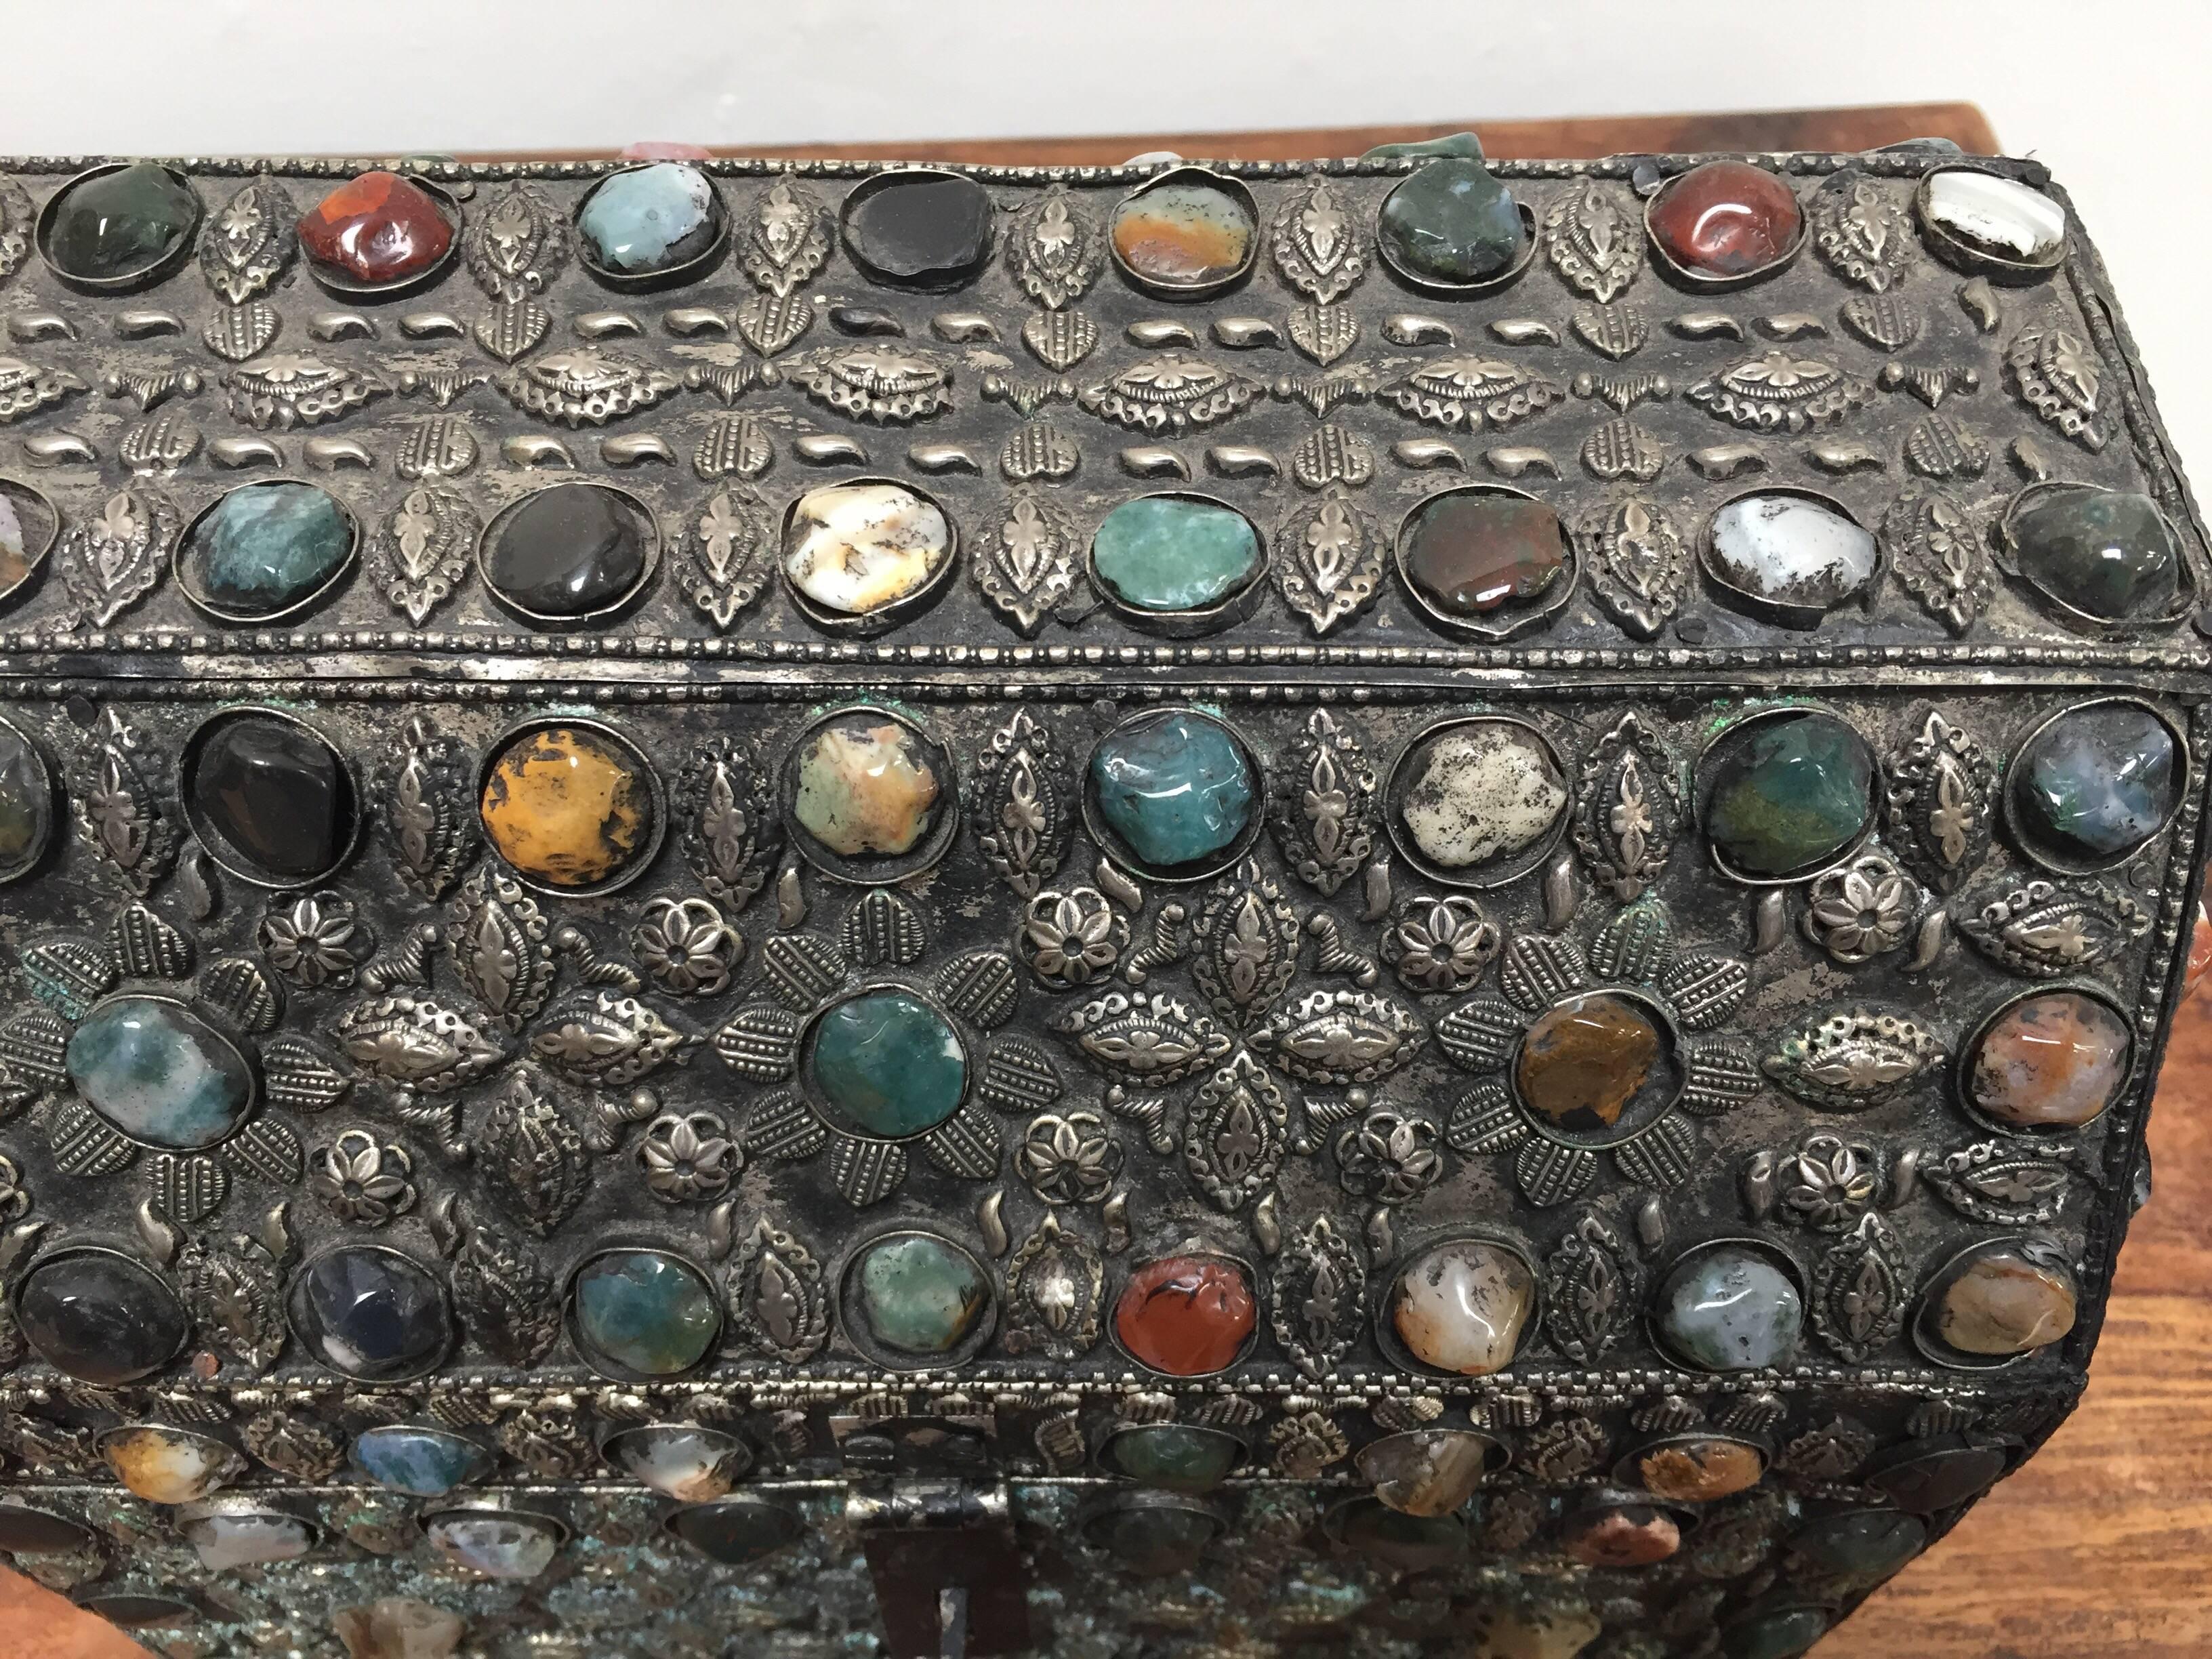 Large Moroccan Wedding Silvered Jewelry Box Inlaid with Semi-Precious Stones In Good Condition For Sale In North Hollywood, CA